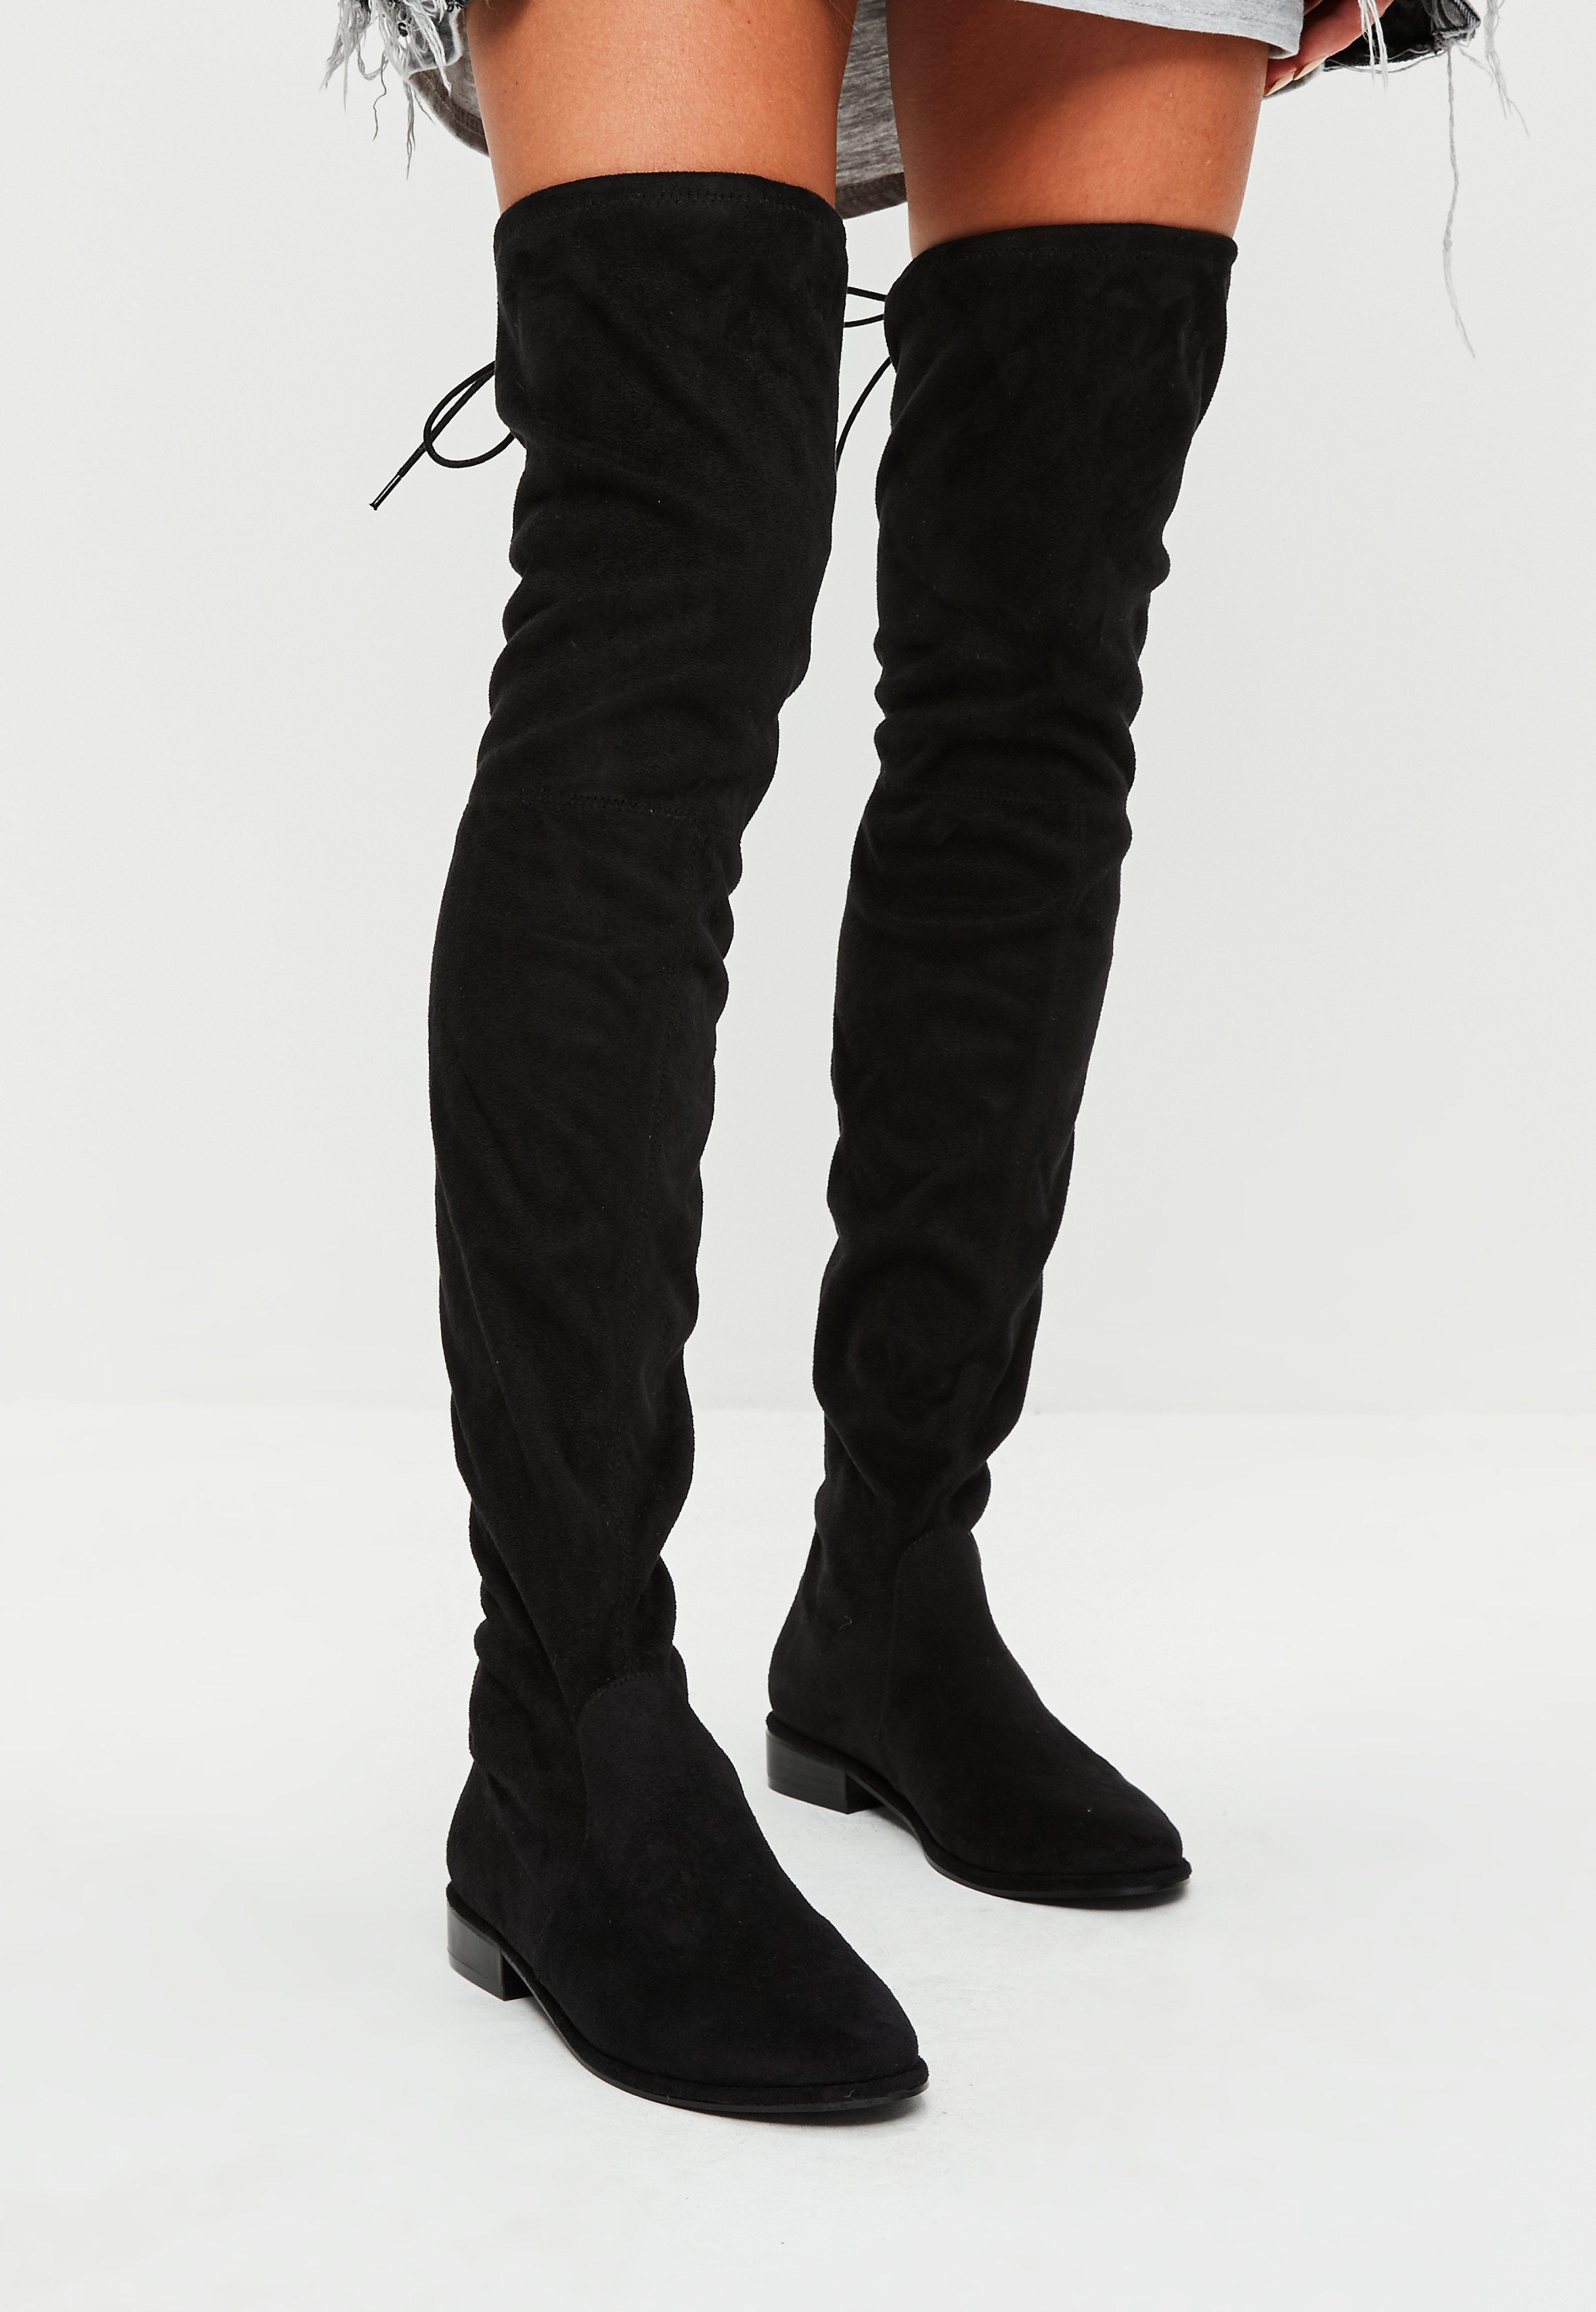 over knee boots black over the knee boots | missguided fwffksd